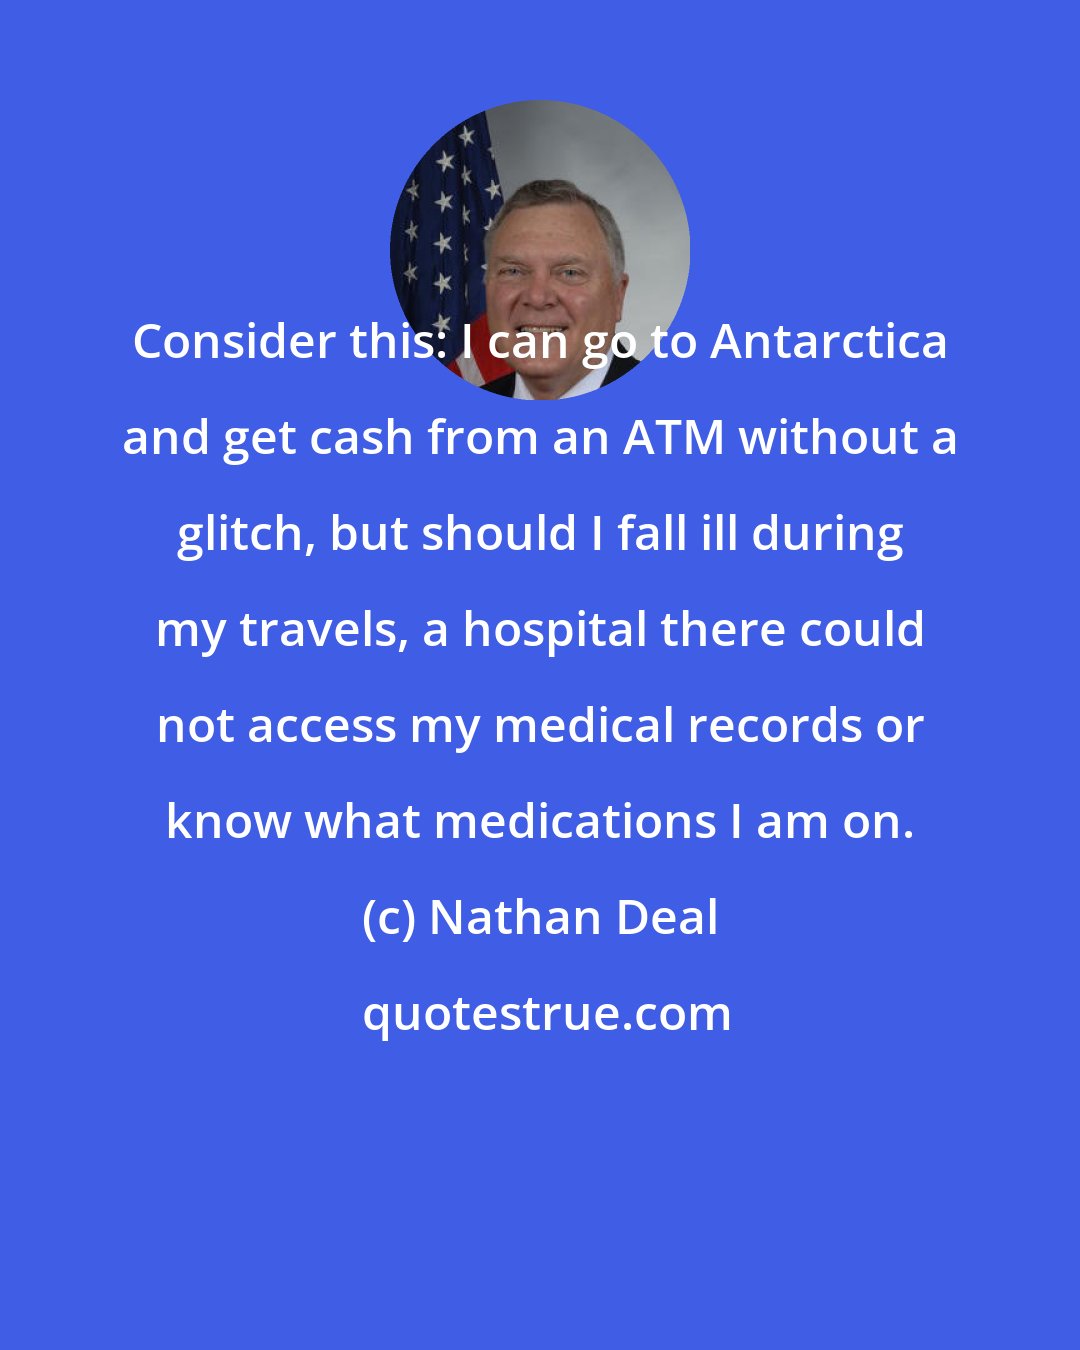 Nathan Deal: Consider this: I can go to Antarctica and get cash from an ATM without a glitch, but should I fall ill during my travels, a hospital there could not access my medical records or know what medications I am on.